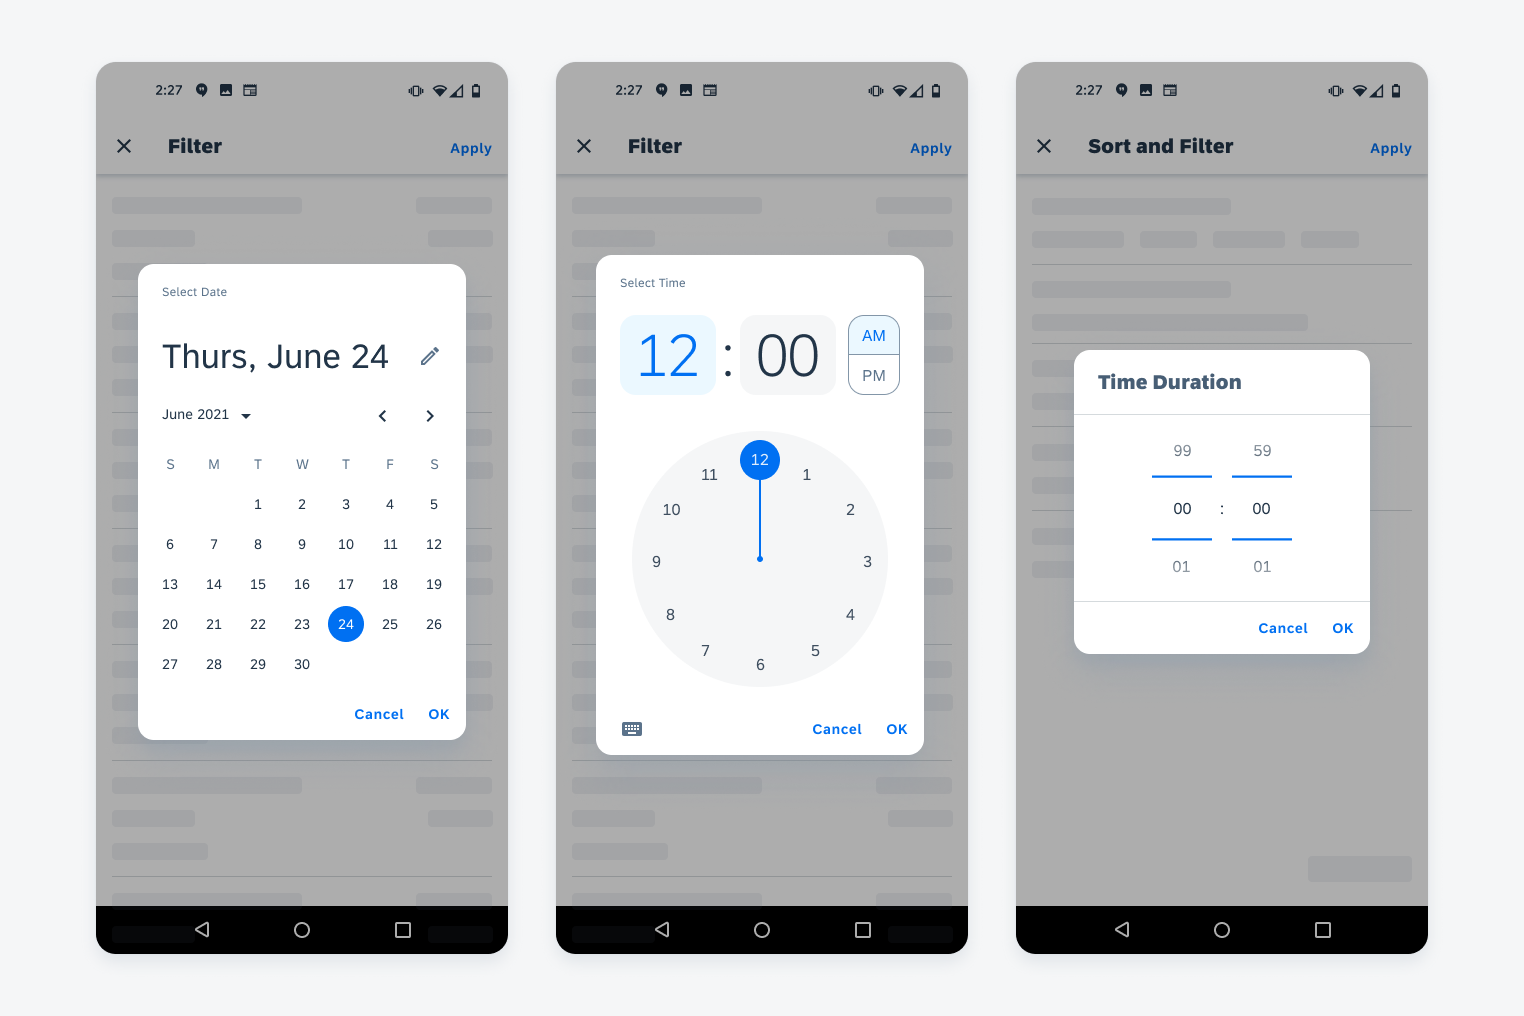 Date picker (left), time picker (middle) and time duration picker (right)